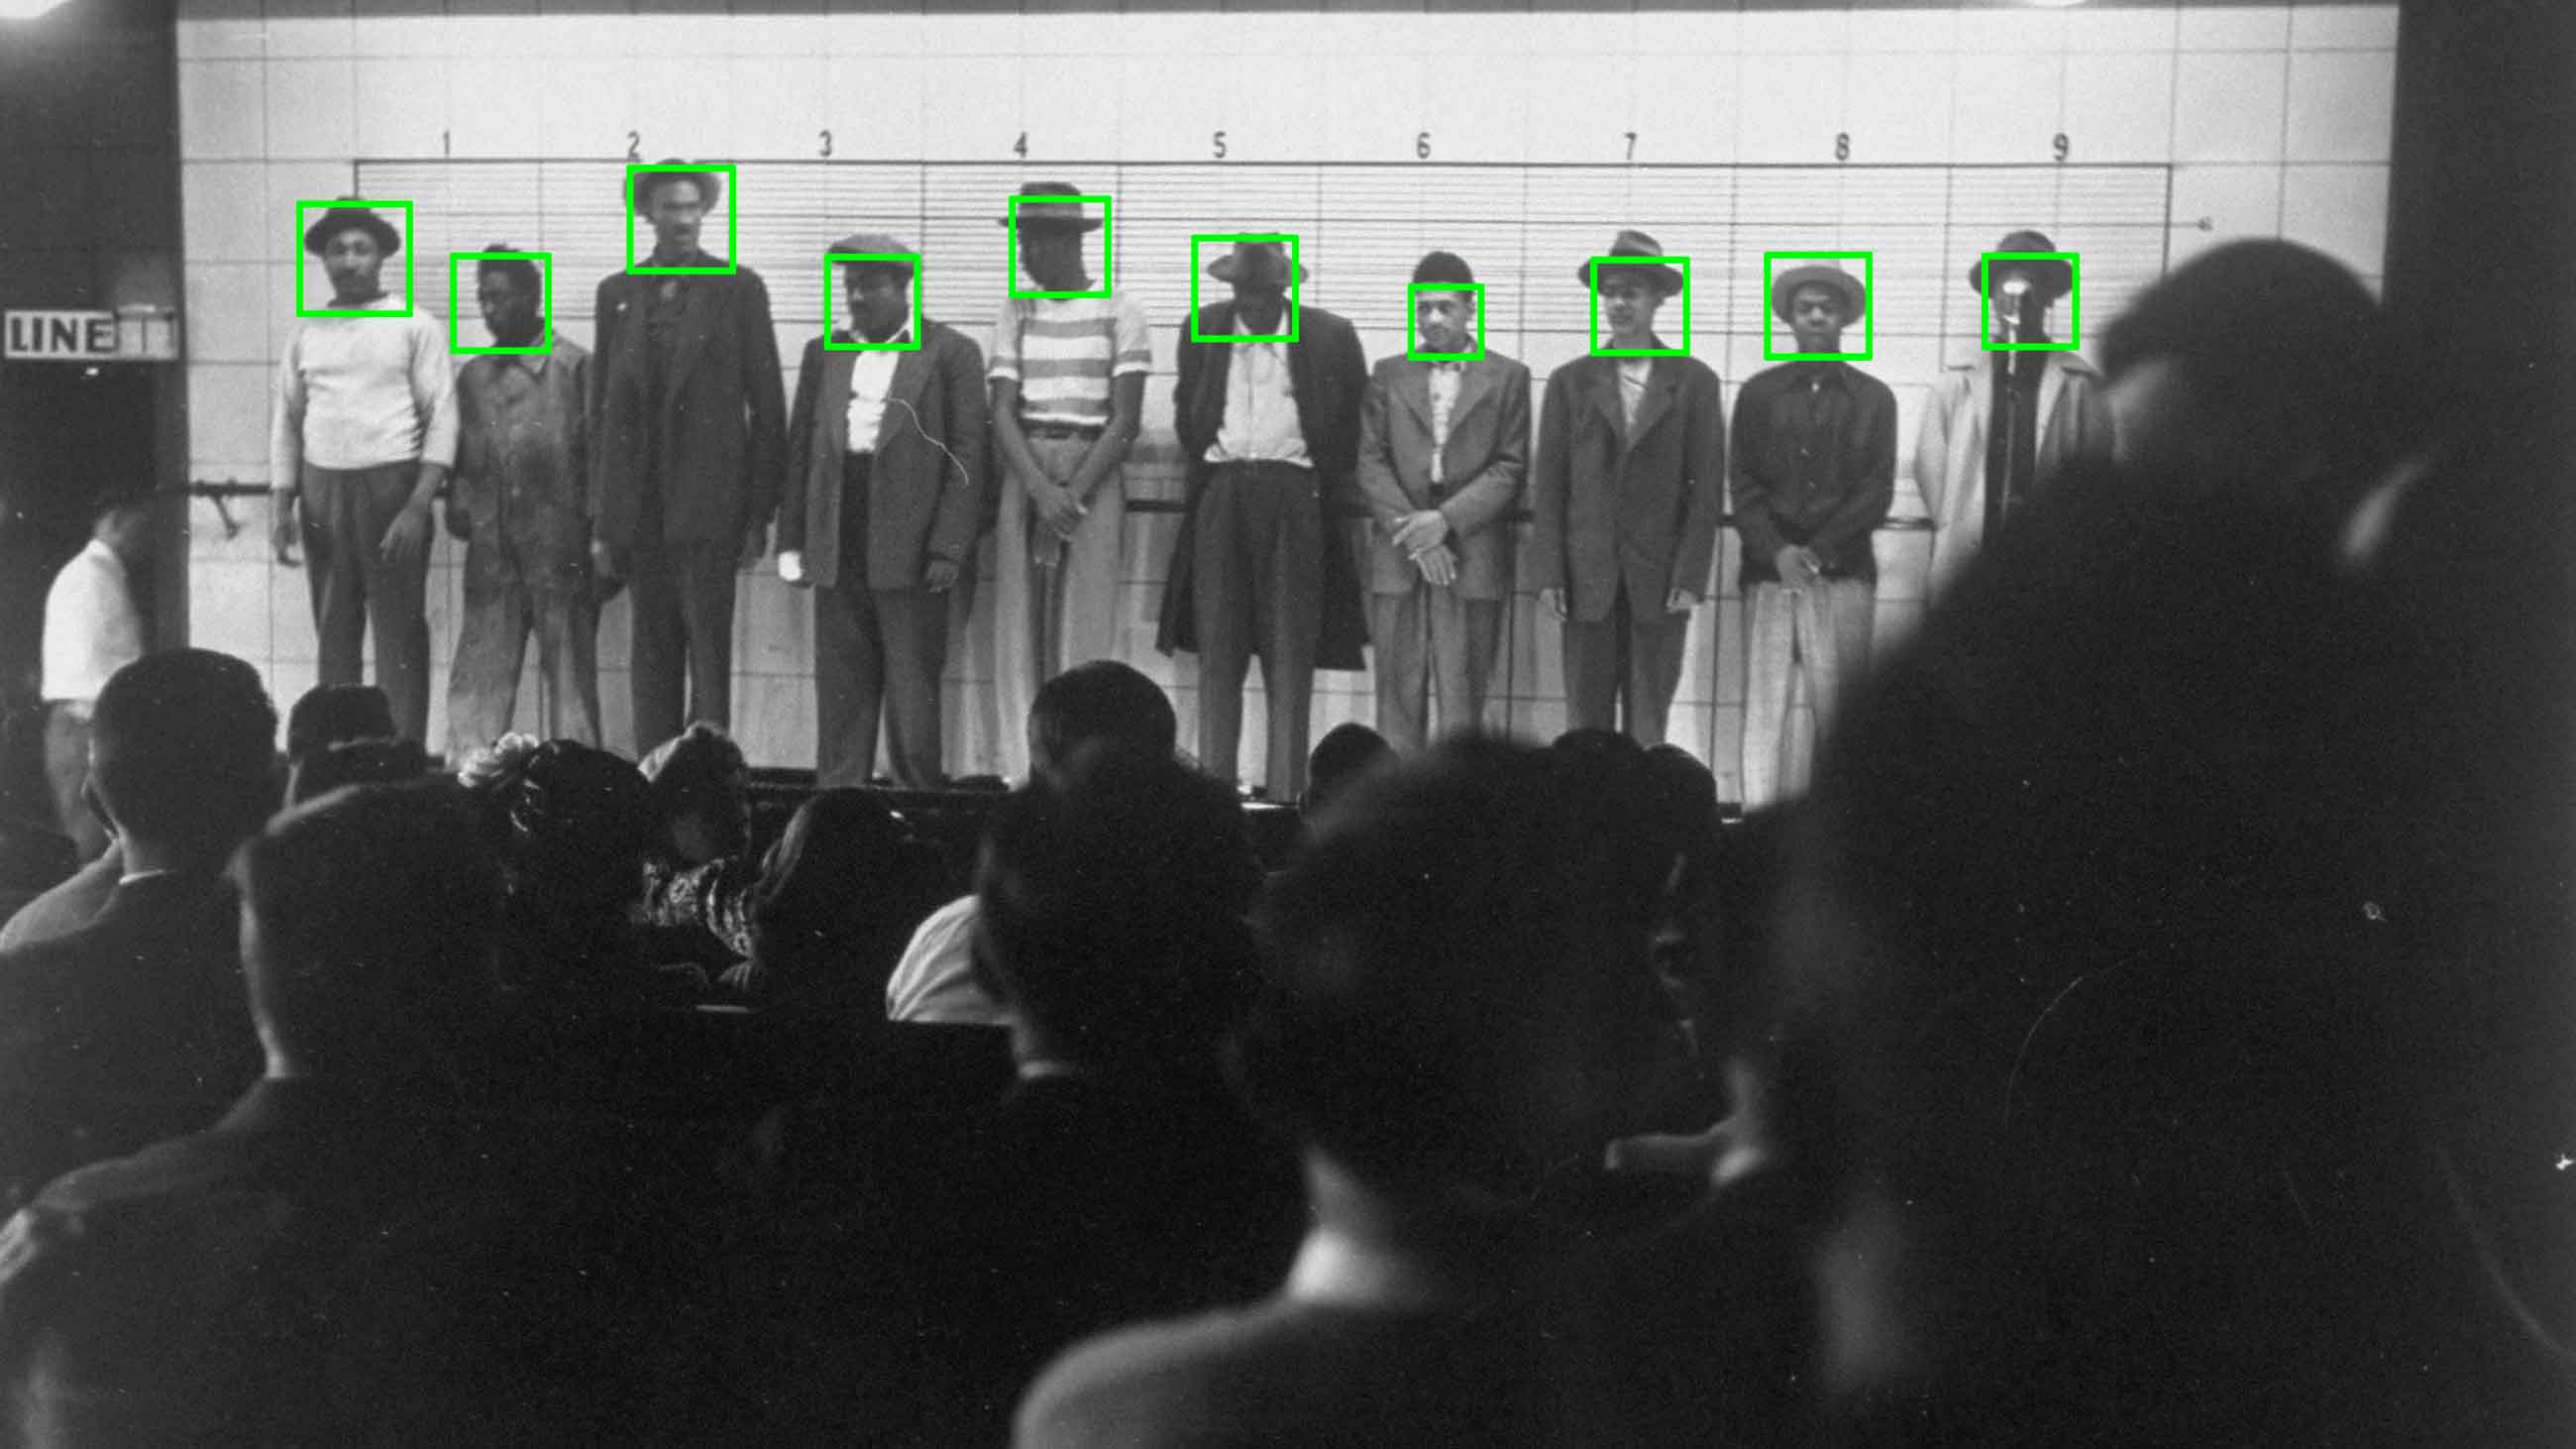 Facial recognition software is becoming common in police work. It's often less accurate on black faces than on white ones.